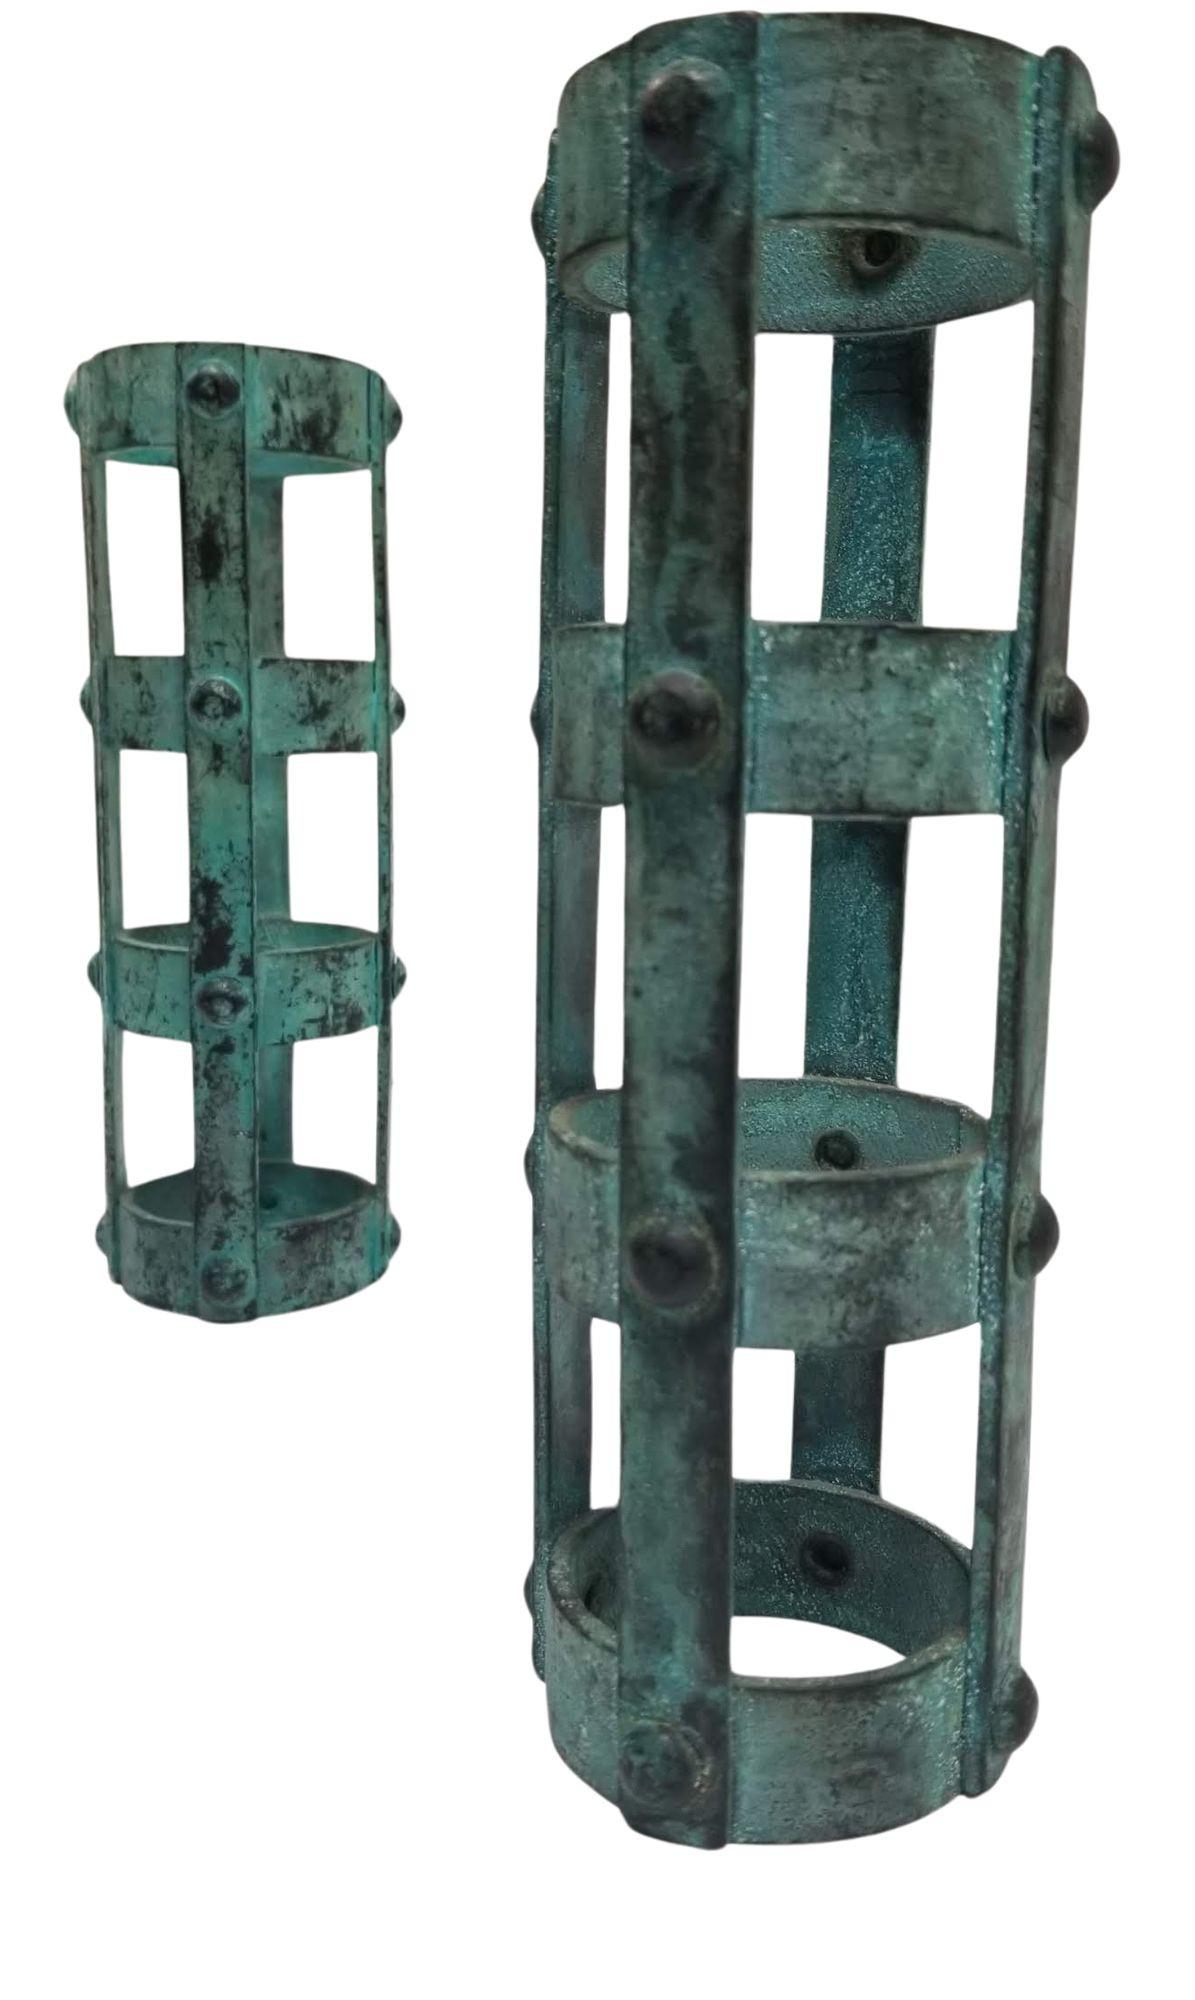 North American Set of 3 Brutalist style Candlestick Holders Cage Design